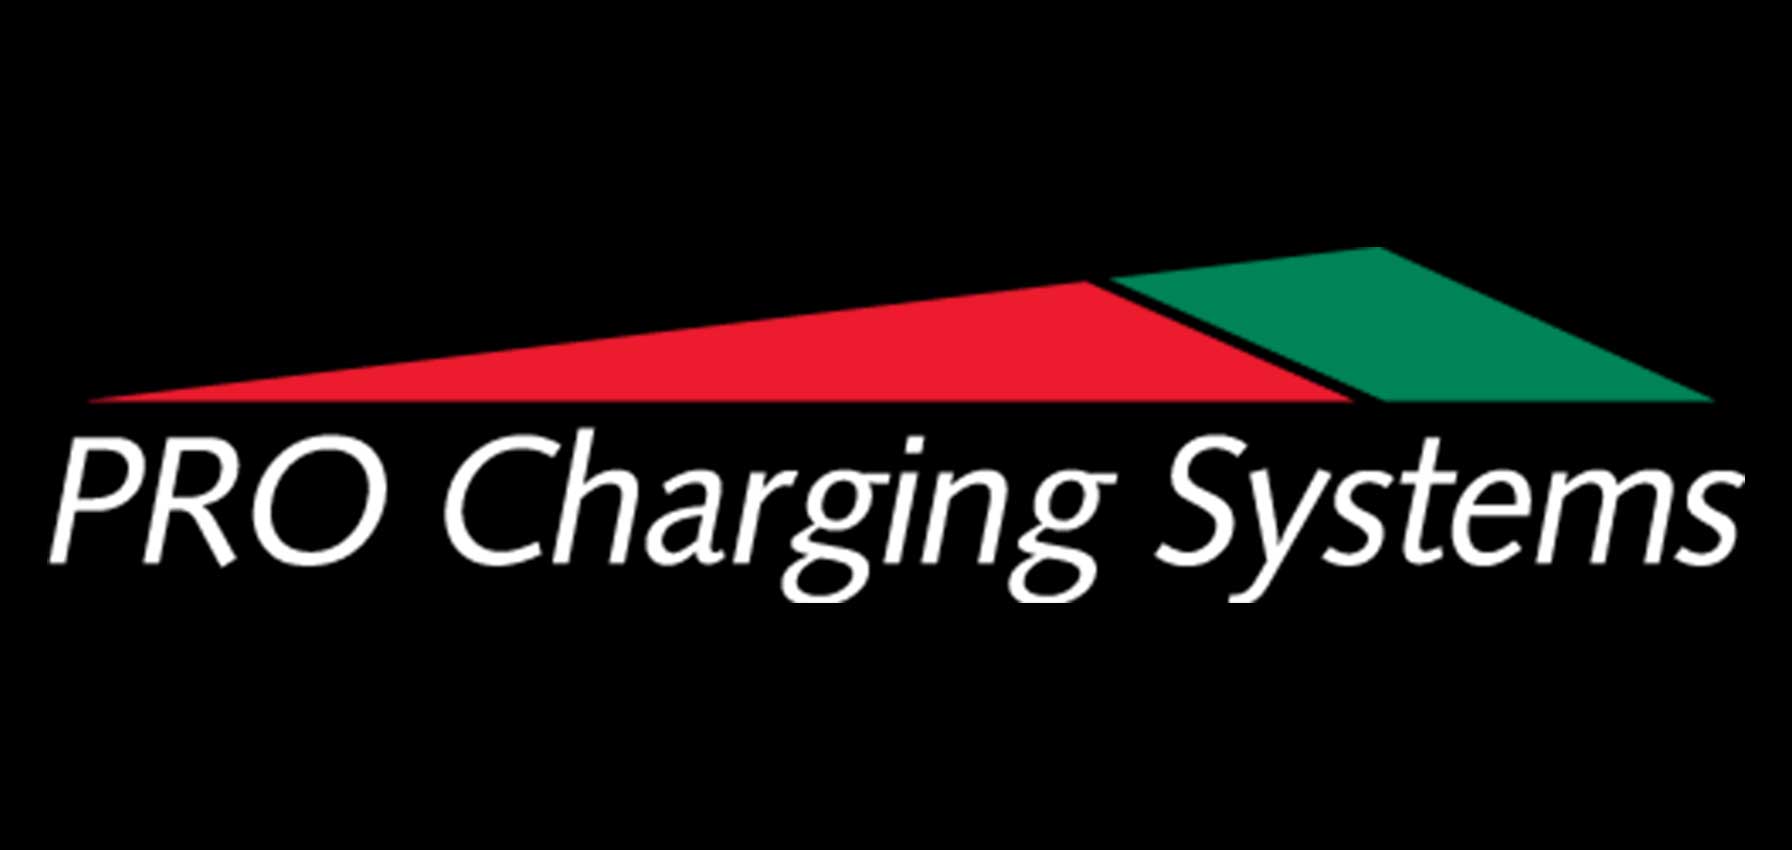 Pro charging systems